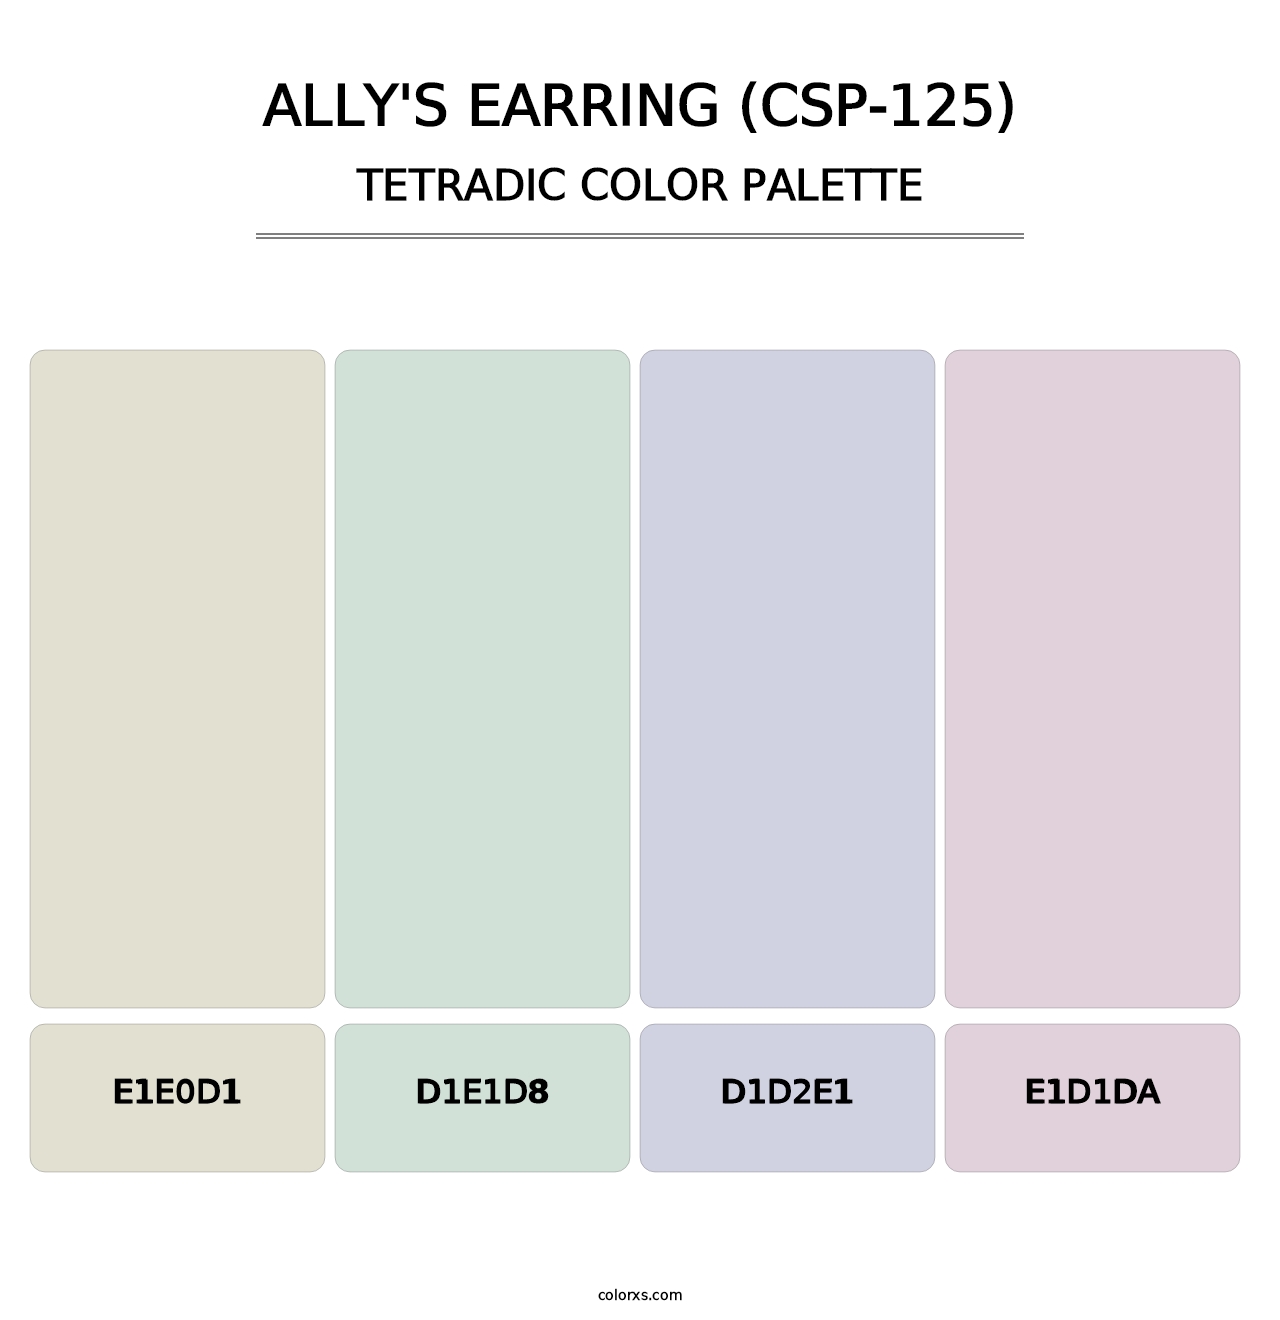 Ally's Earring (CSP-125) - Tetradic Color Palette